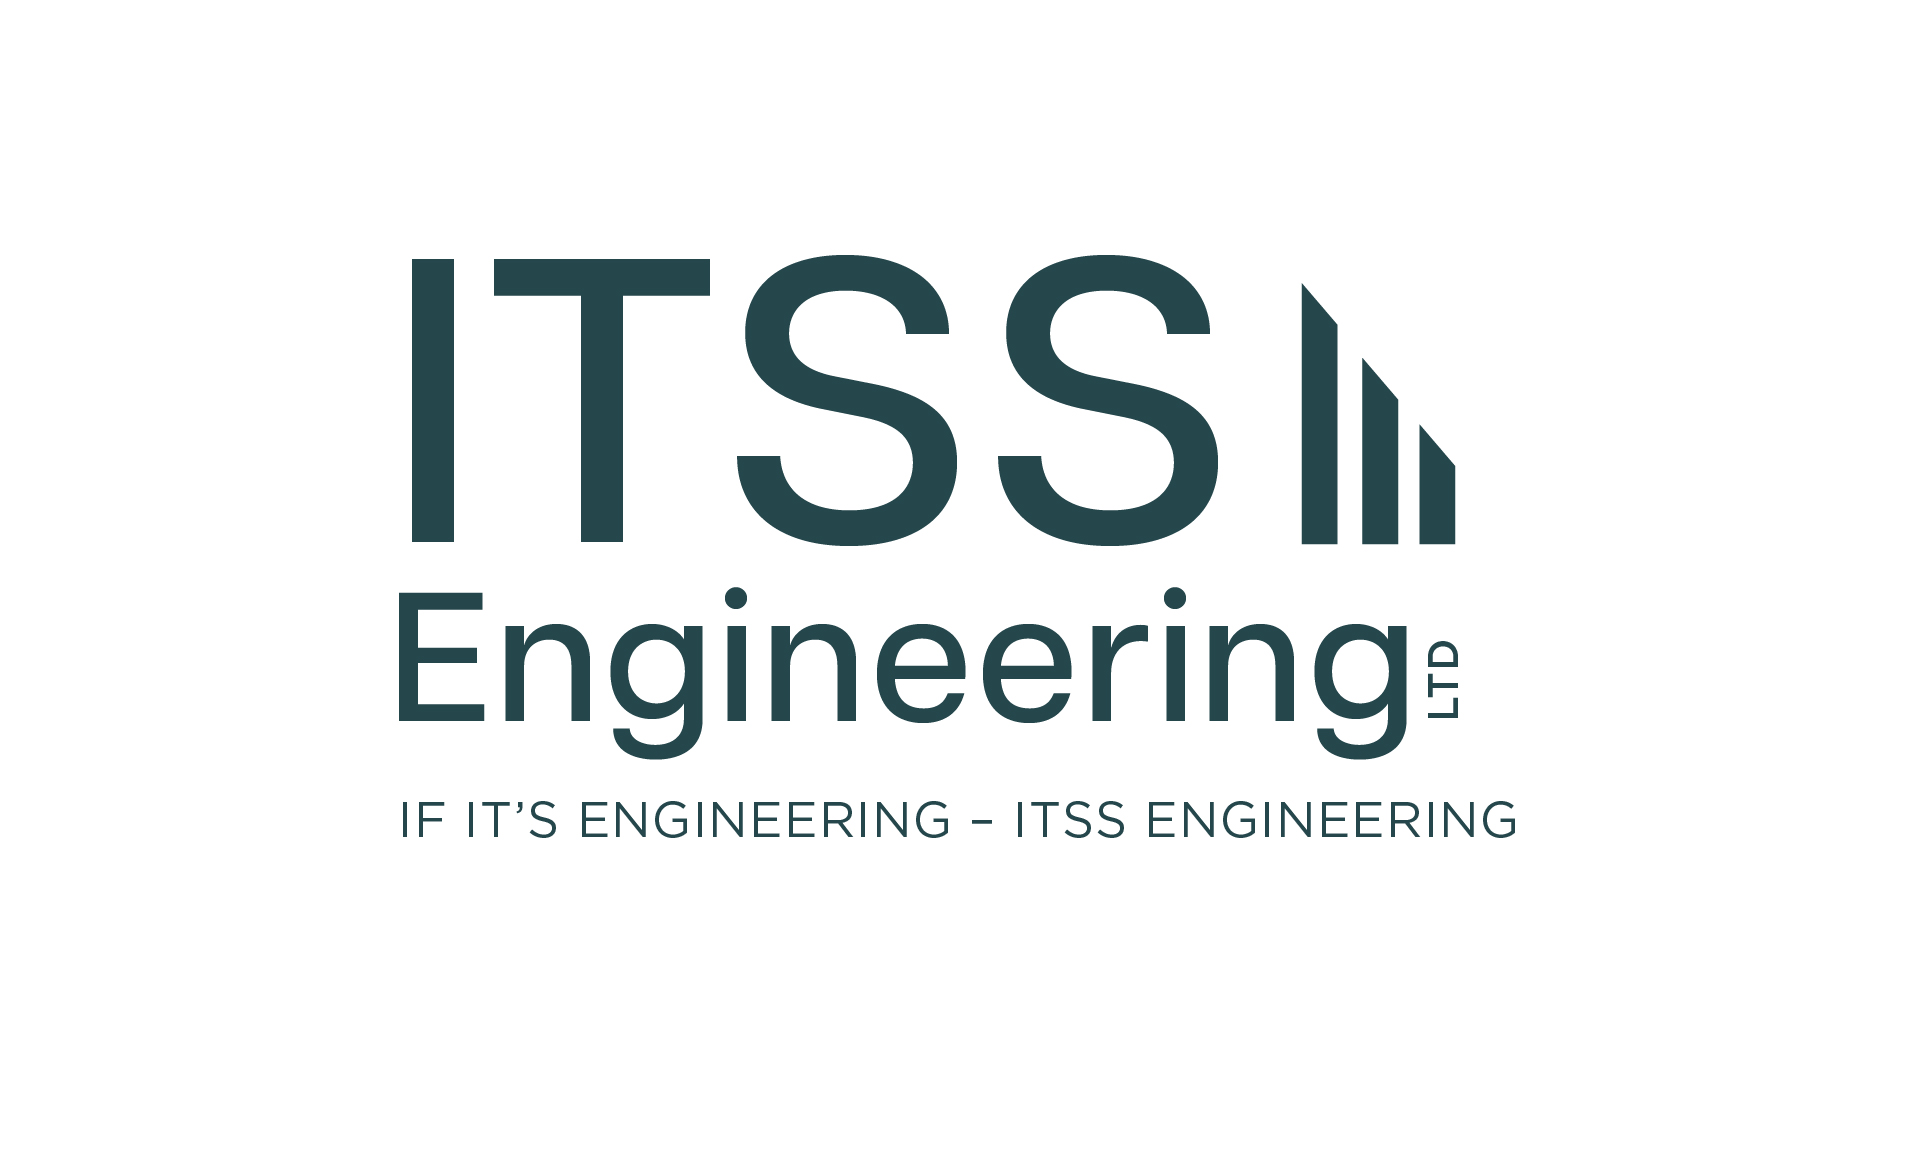 ITSS Engineering (formerly MS Engineering)